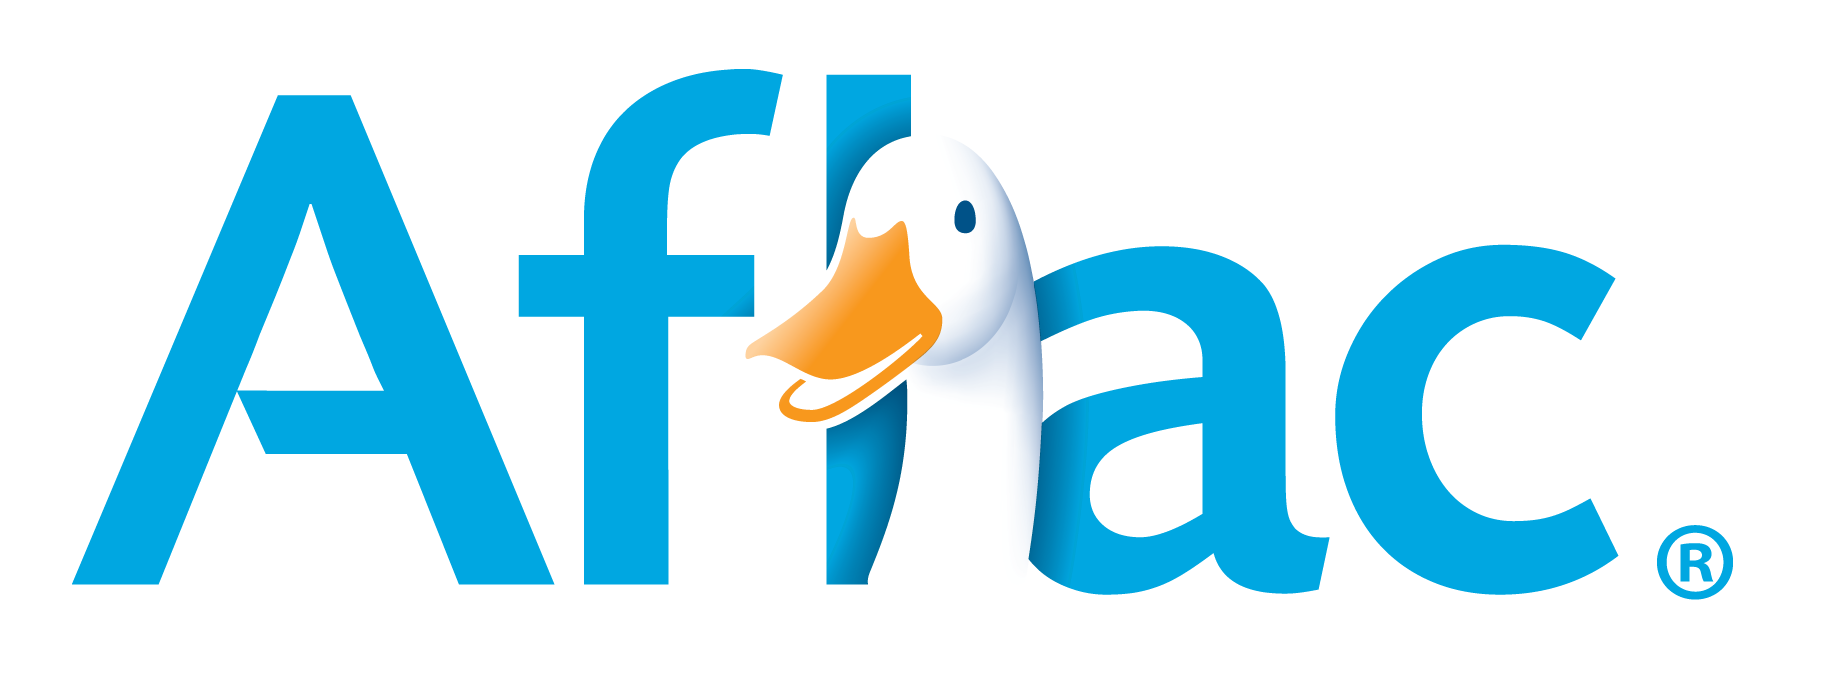 aflac.png